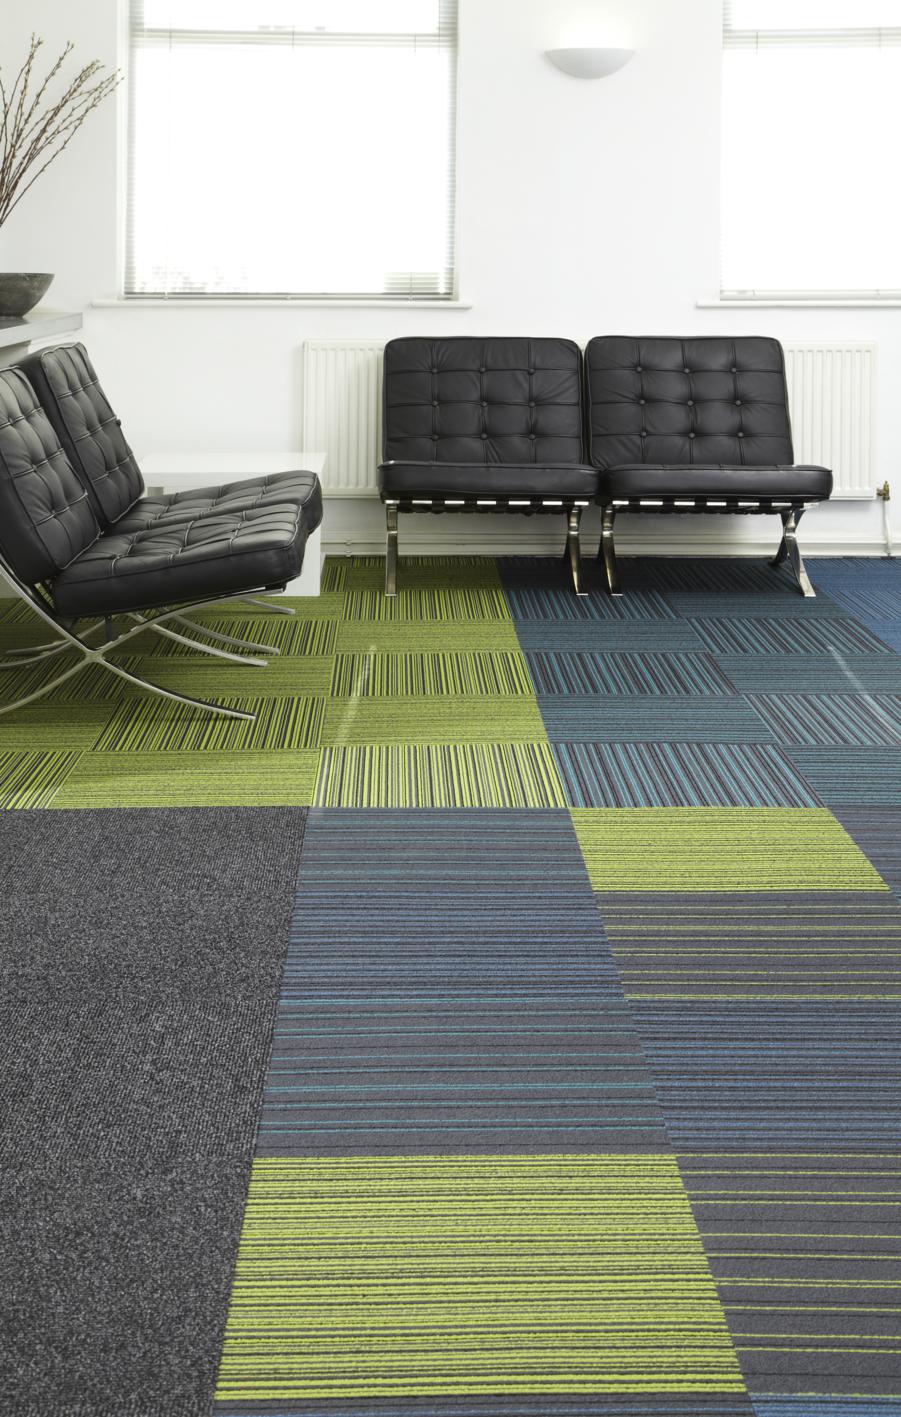 Healthcare waiting area with carpet tiles